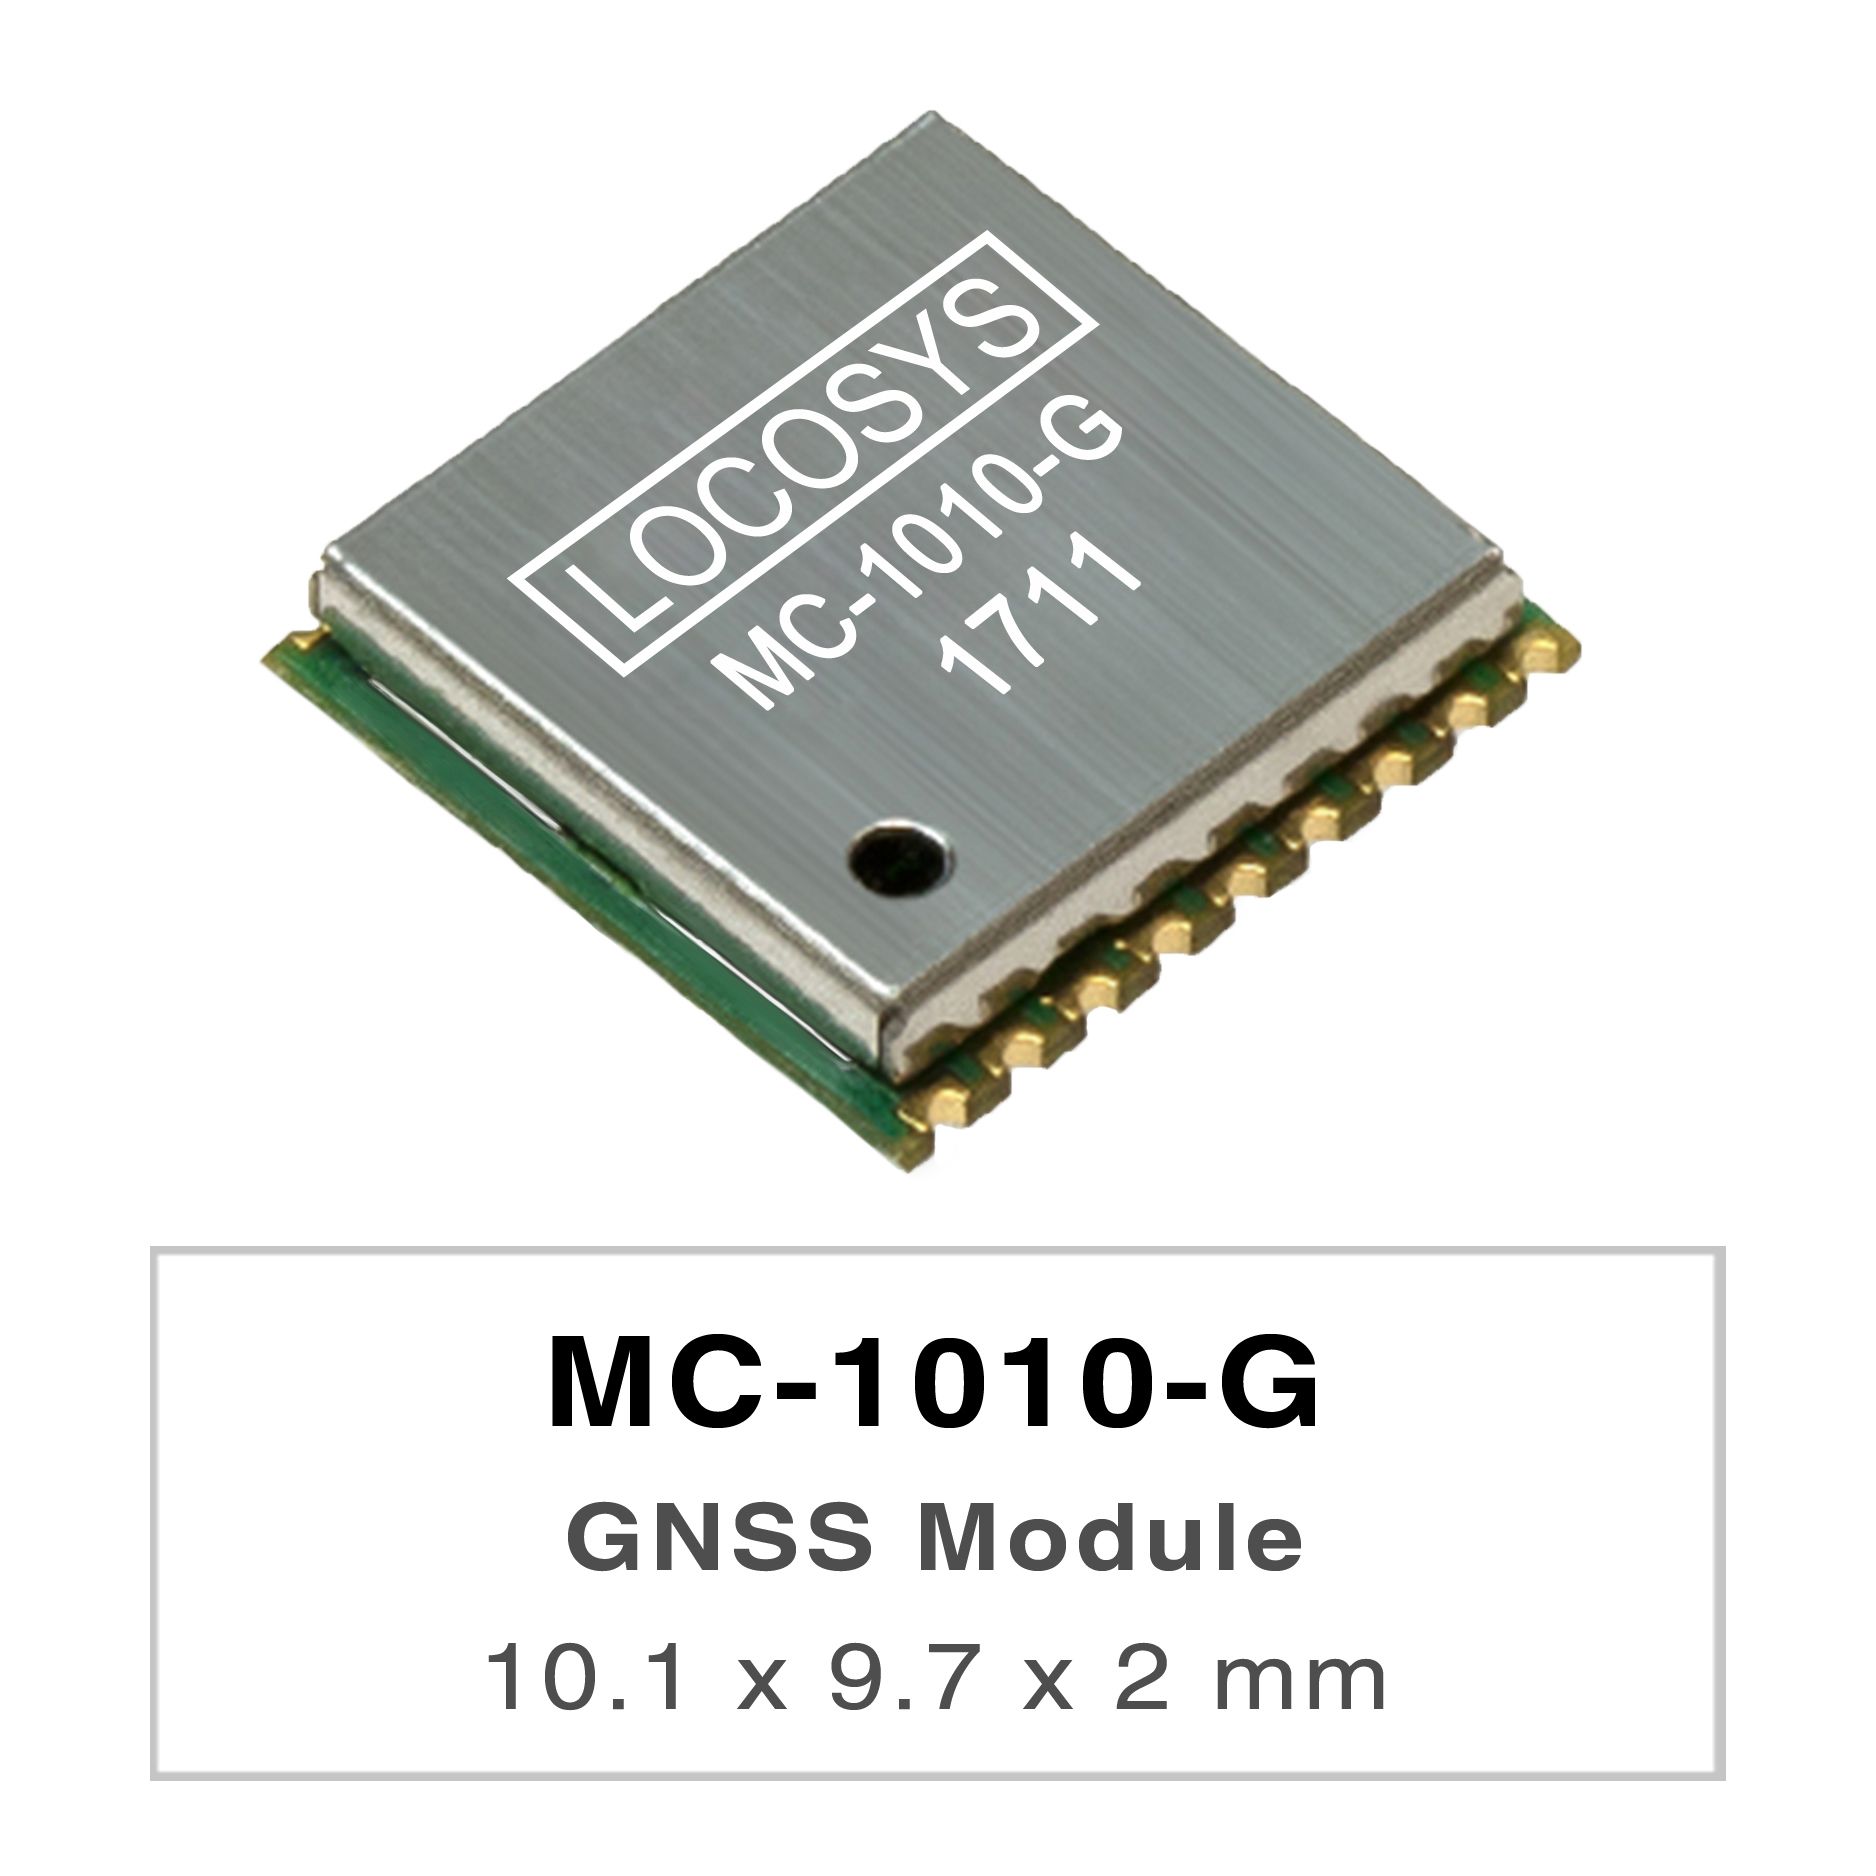 LOCOSYS MC-1010-G is a complete standalone GNSS module.